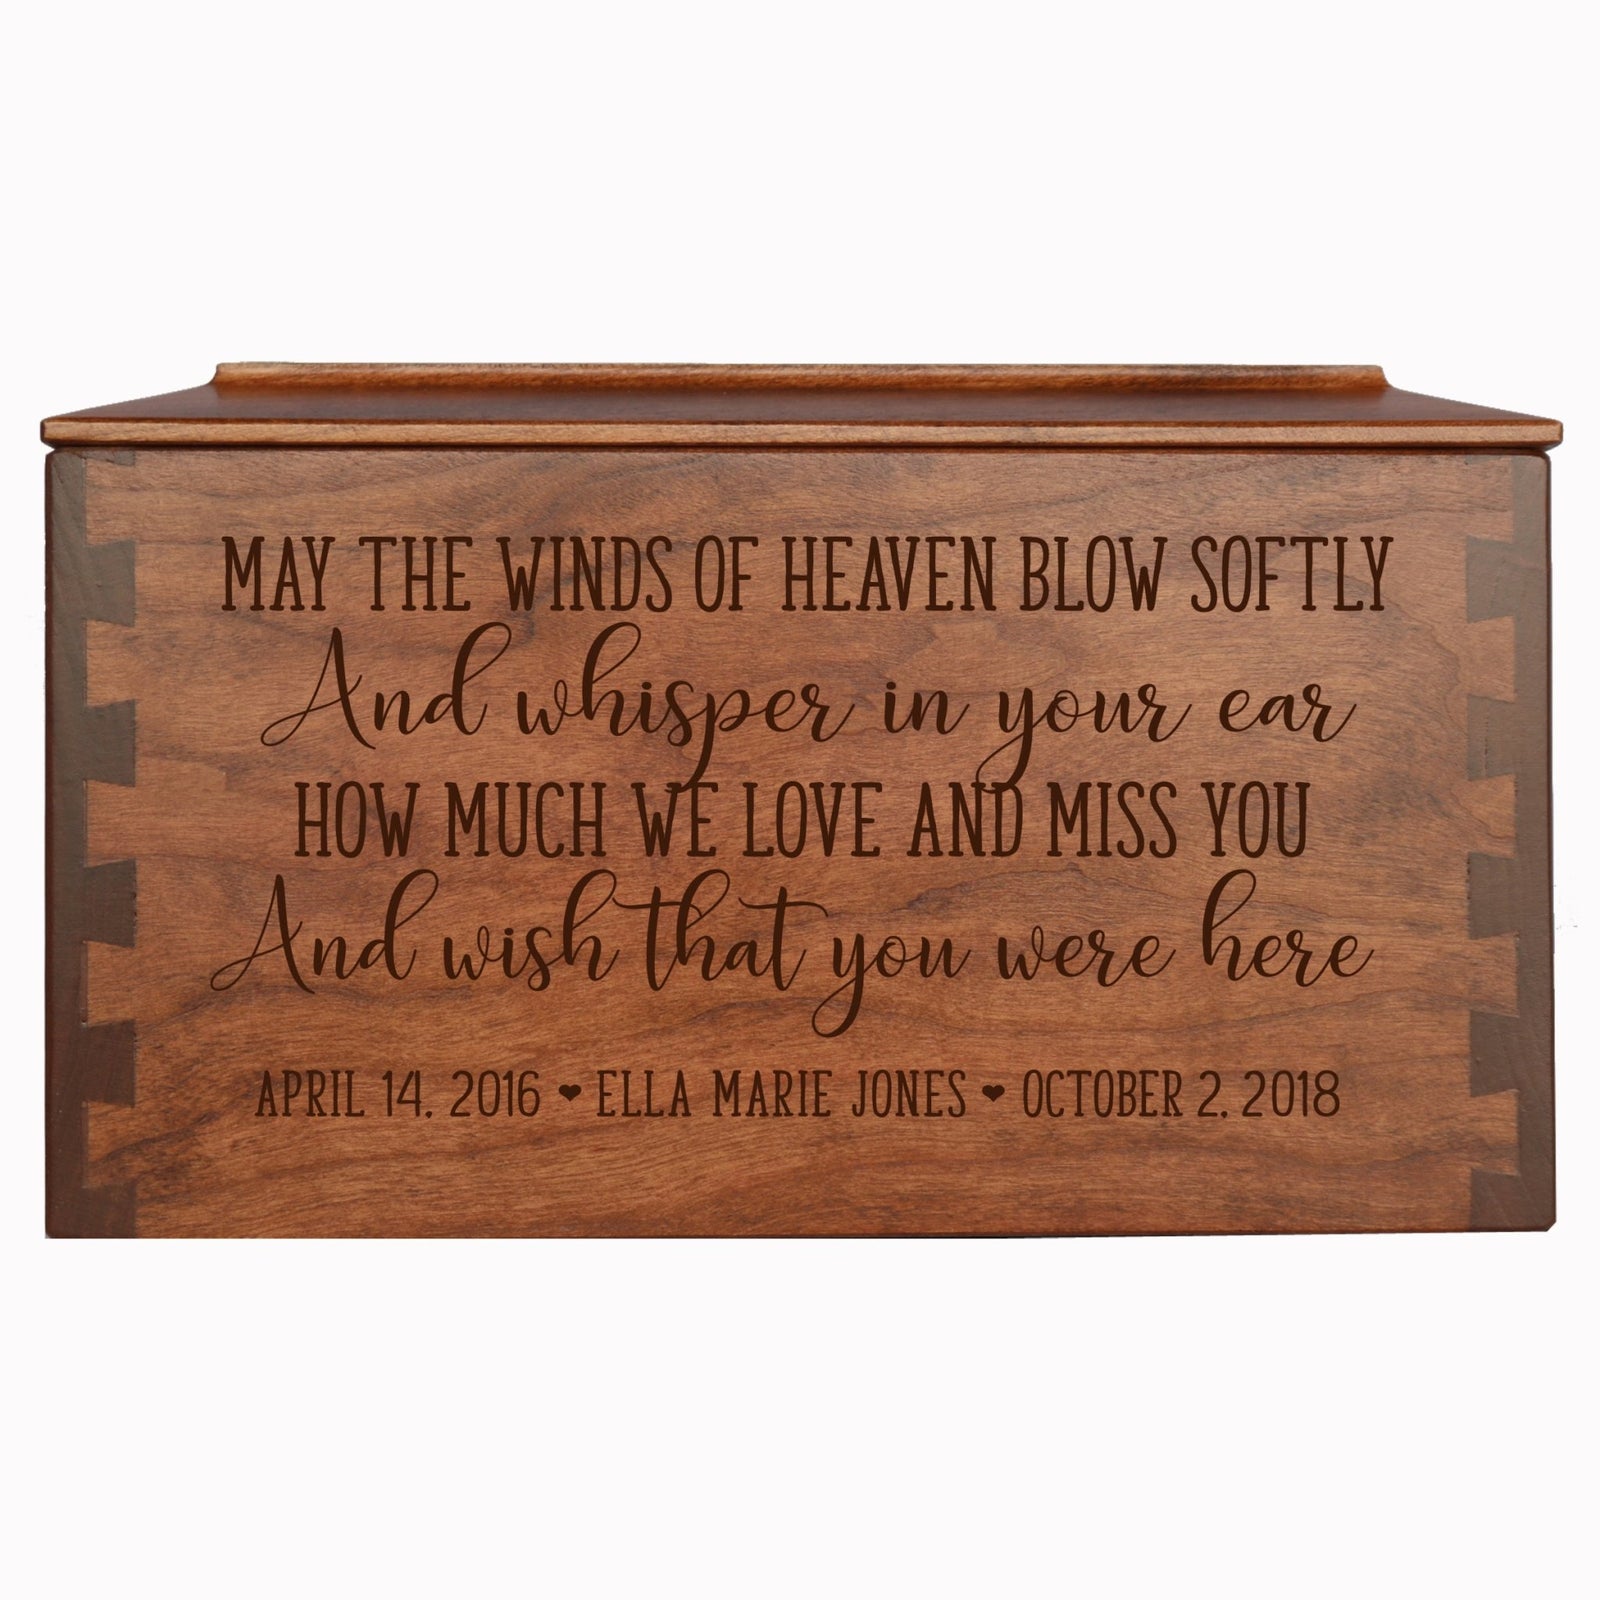 Custom Wooden Cremation Urn Box Large for Human Ashes holds 291 cu in May The Winds - LifeSong Milestones